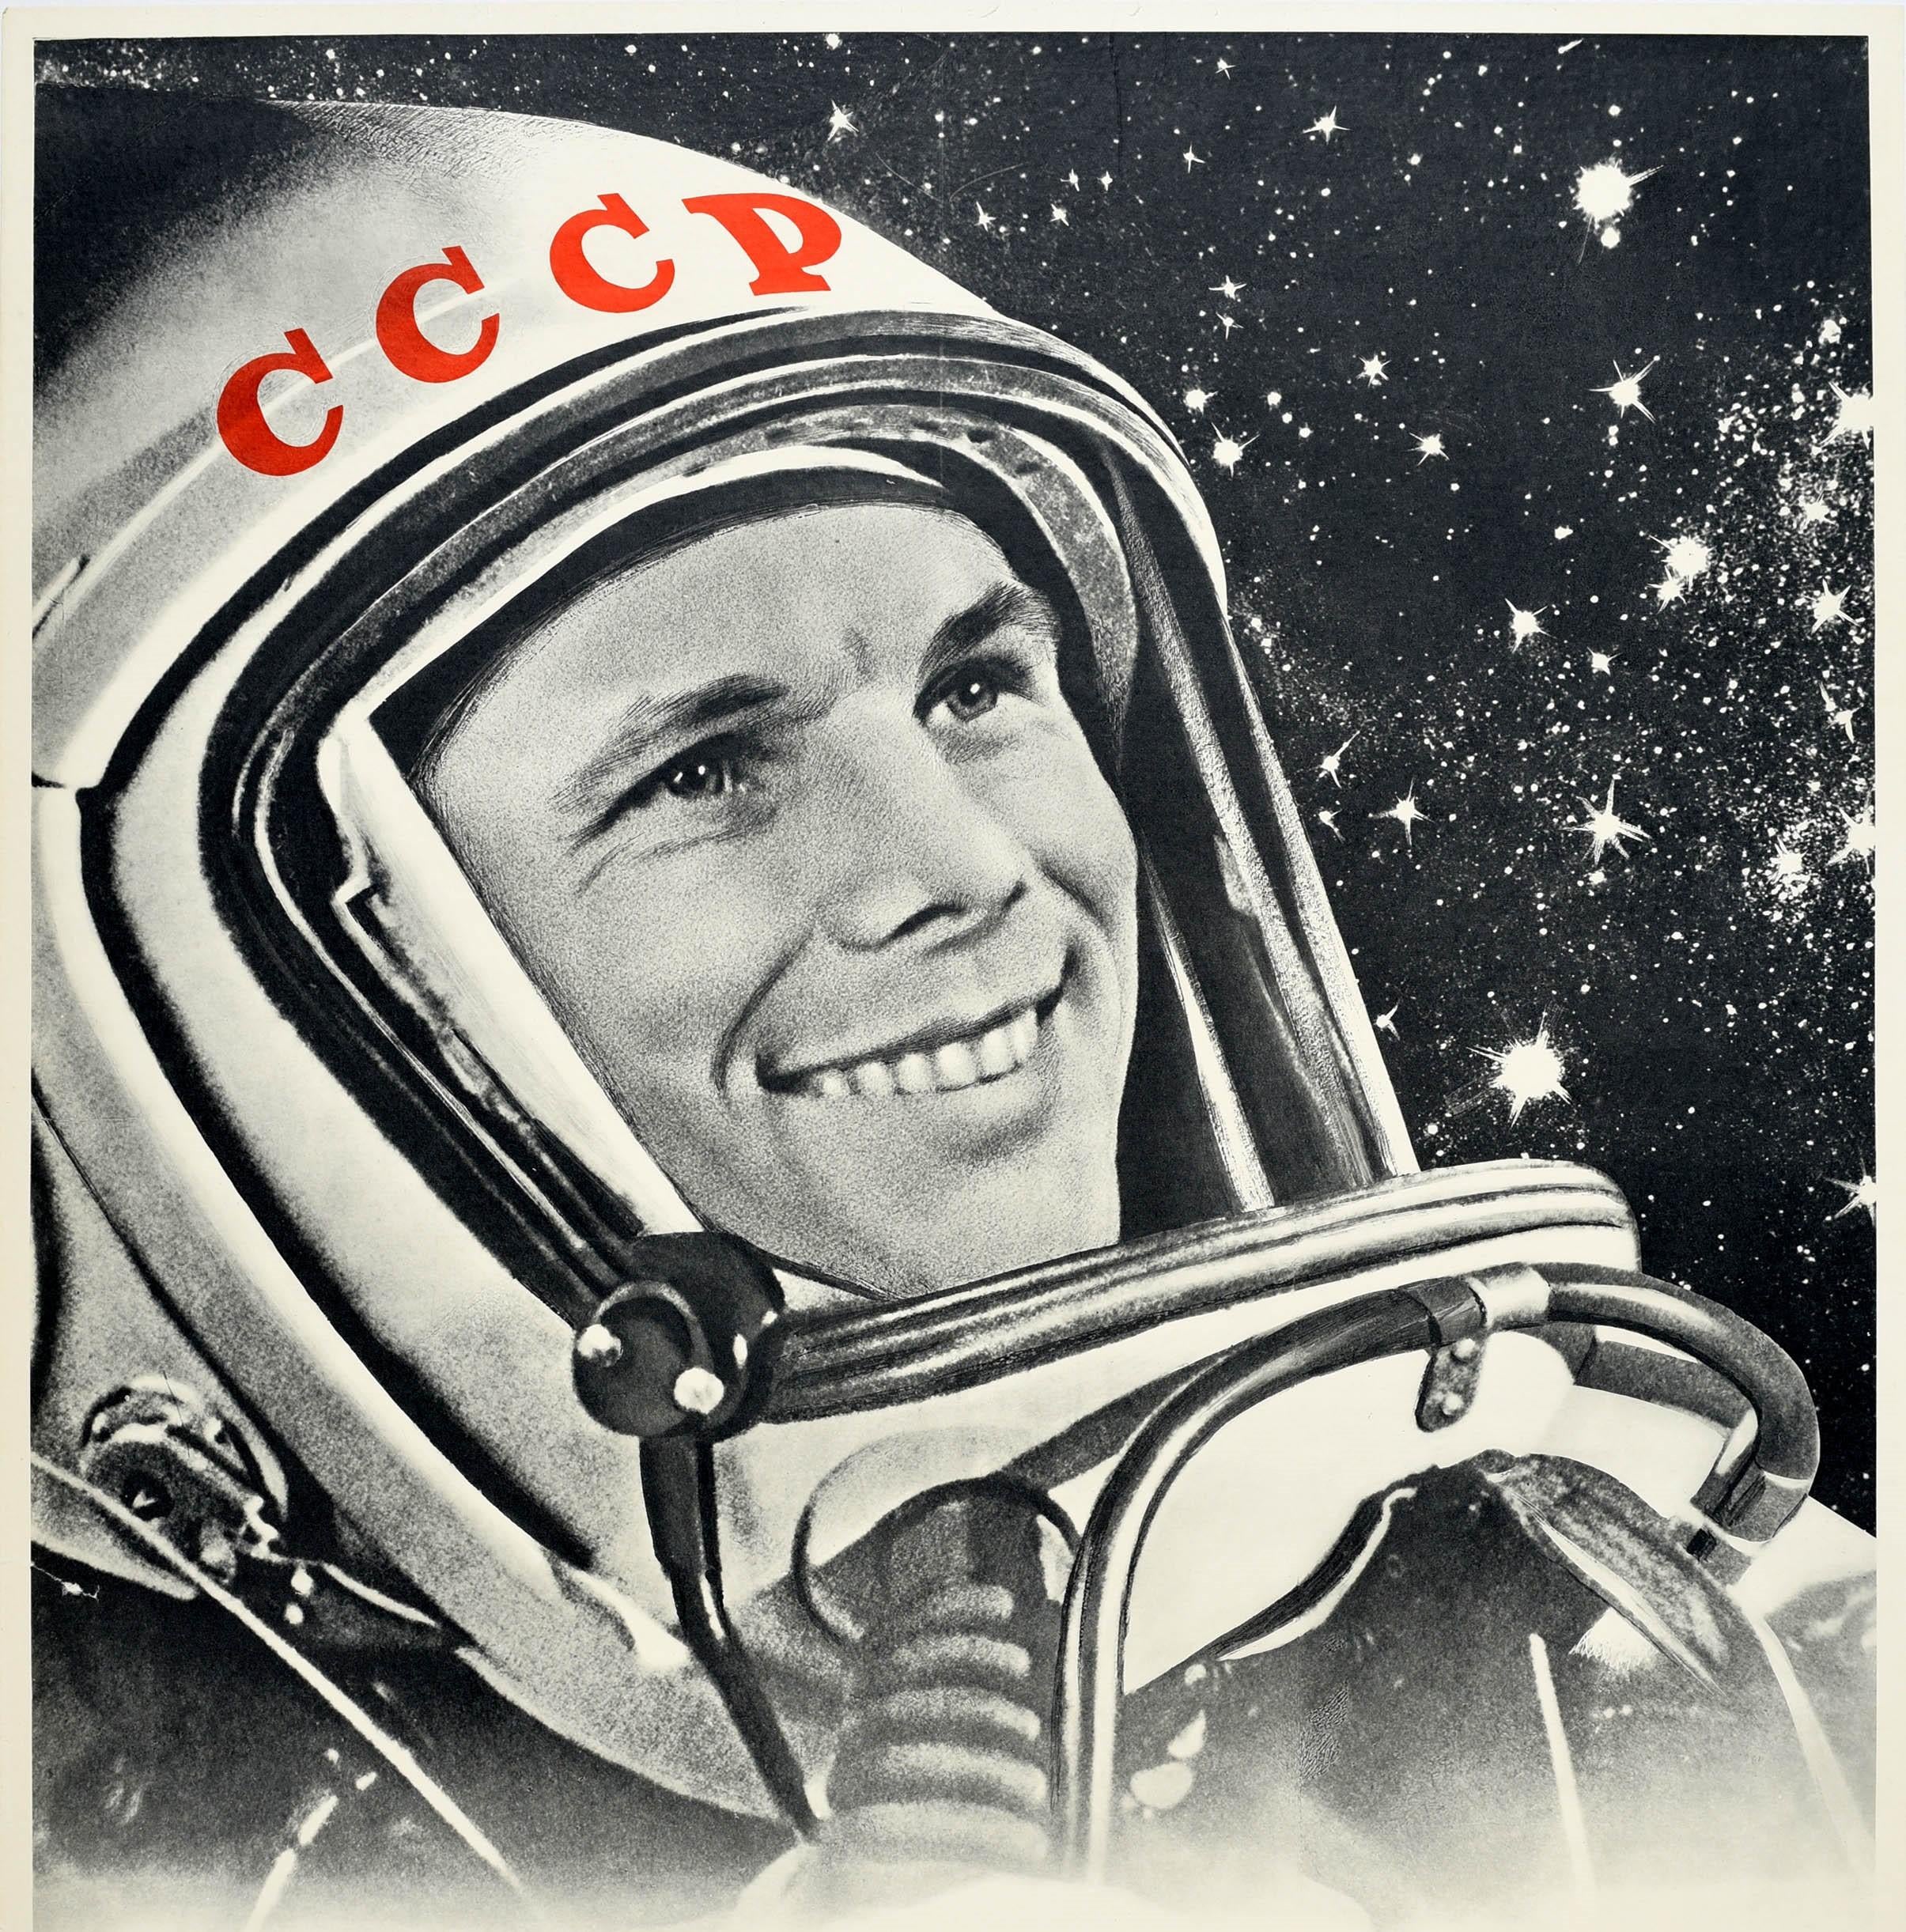 Original vintage Soviet propaganda poster - Glory to the Son of the Party! / Сыну Партии - Слава! Great design depicting a black and white photo in front of a starry space sky background of a smiling Yuri Gagarin (Yuri Alekseyevich Gagarin;